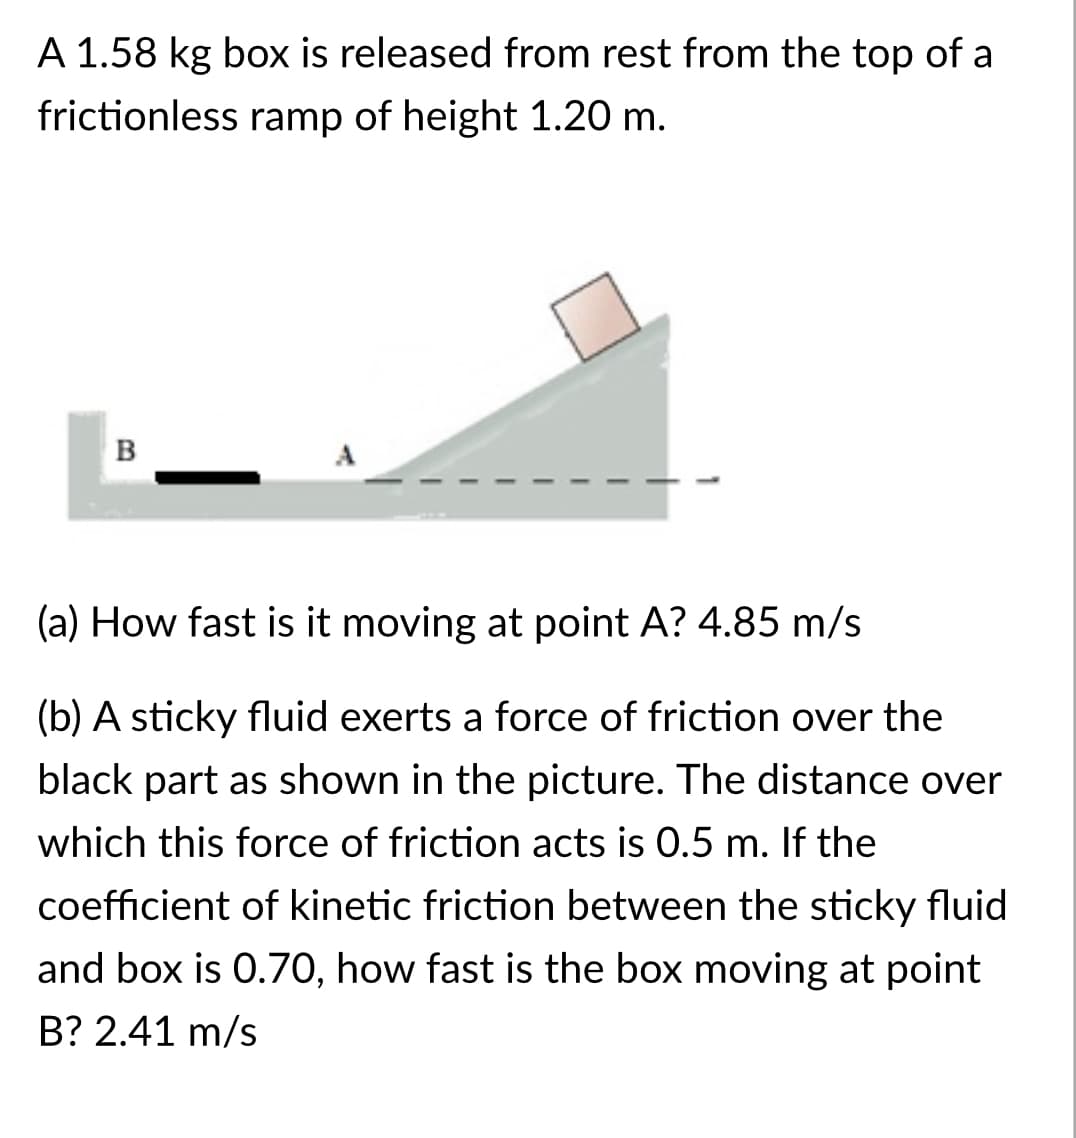 A 1.58 kg box is released from rest from the top of a
frictionless ramp of height 1.20 m.
B
(a) How fast is it moving at point A? 4.85 m/s
(b) A sticky fluid exerts a force of friction over the
black part as shown in the picture. The distance over
which this force of friction acts is 0.5 m. If the
coefficient of kinetic friction between the sticky fluid
and box is 0.7O, how fast is the box moving at point
B? 2.41 m/s
